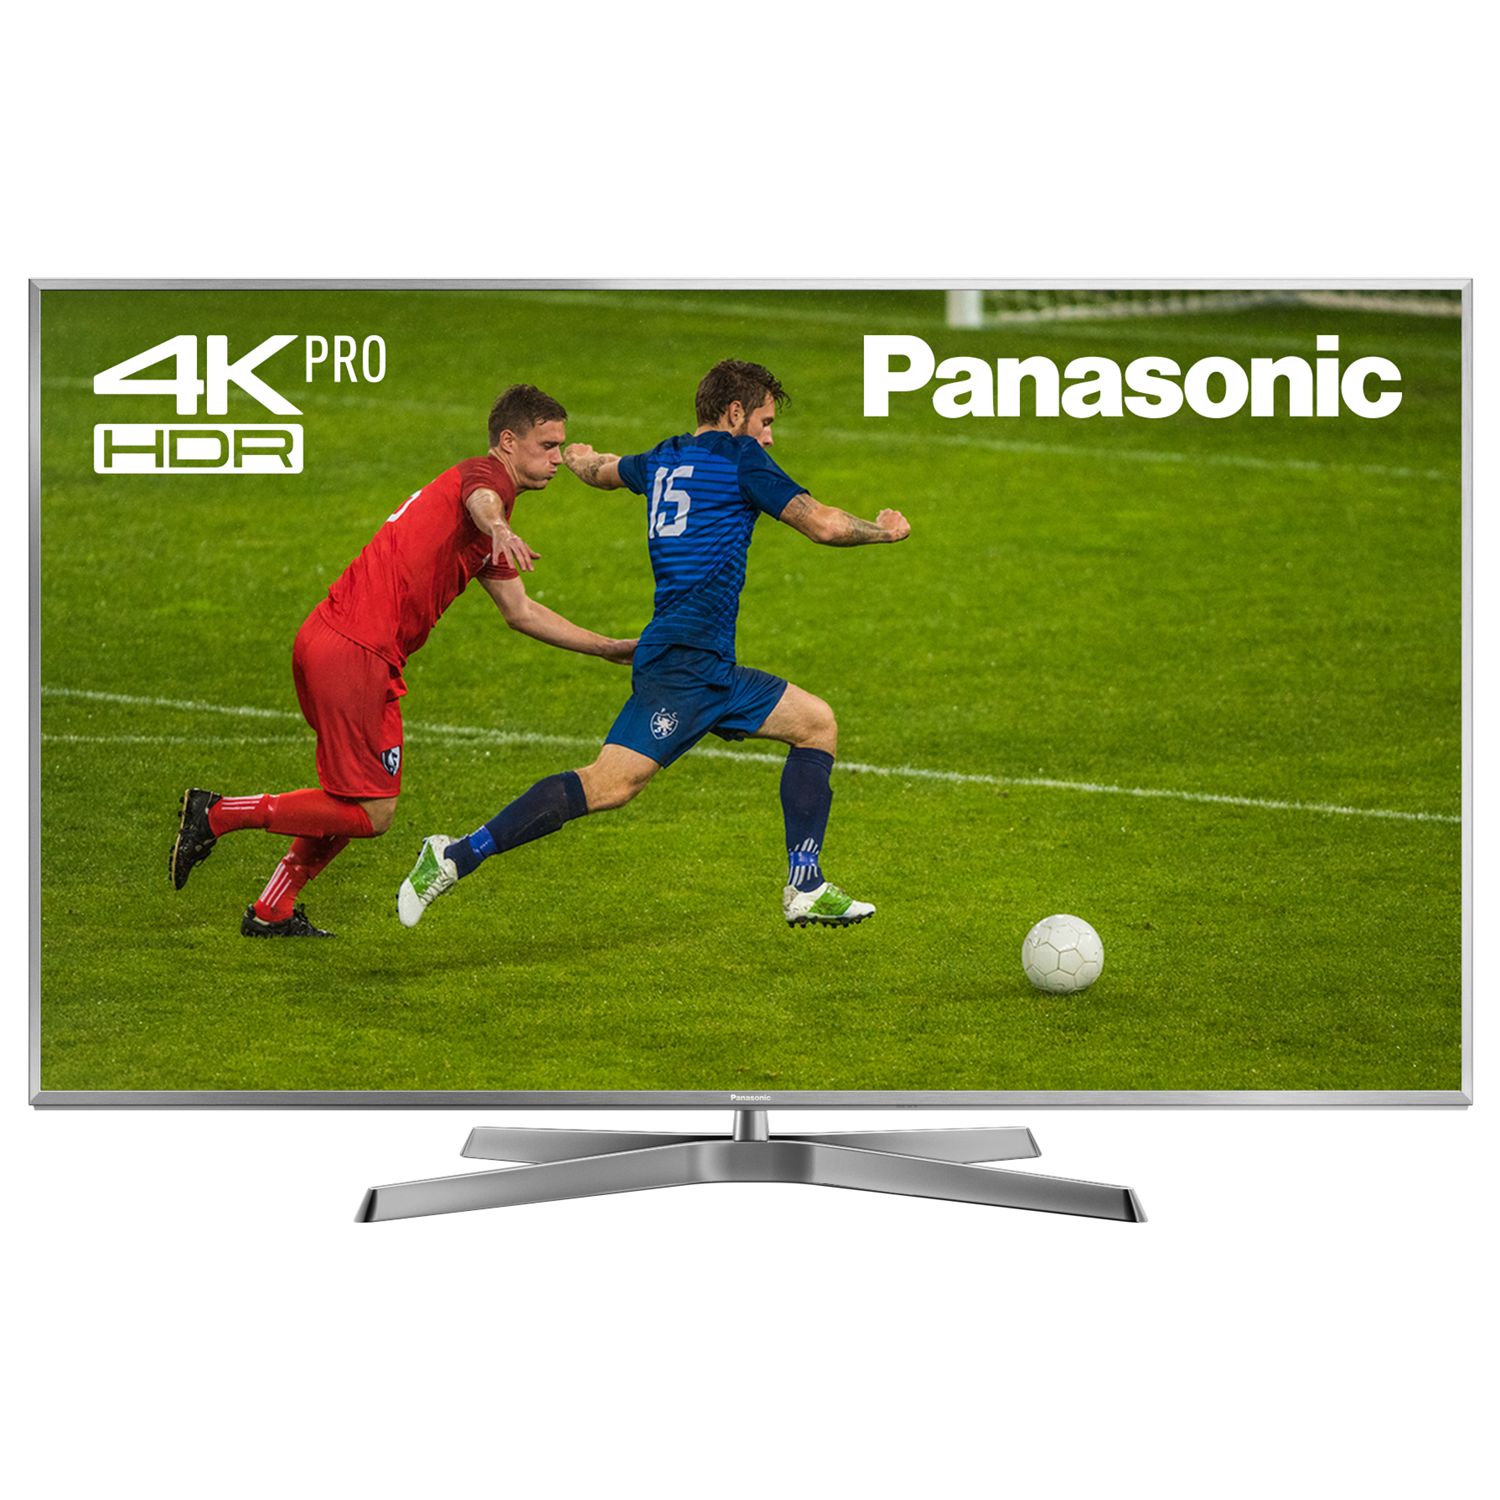 Panasonic TX-58EX750B LED HDR 4K Ultra HD 3D Smart TV, 58" with Freeview Play/Freesat HD & Height Adjustable Swivel Stand, Ultra HD Certified, Silver